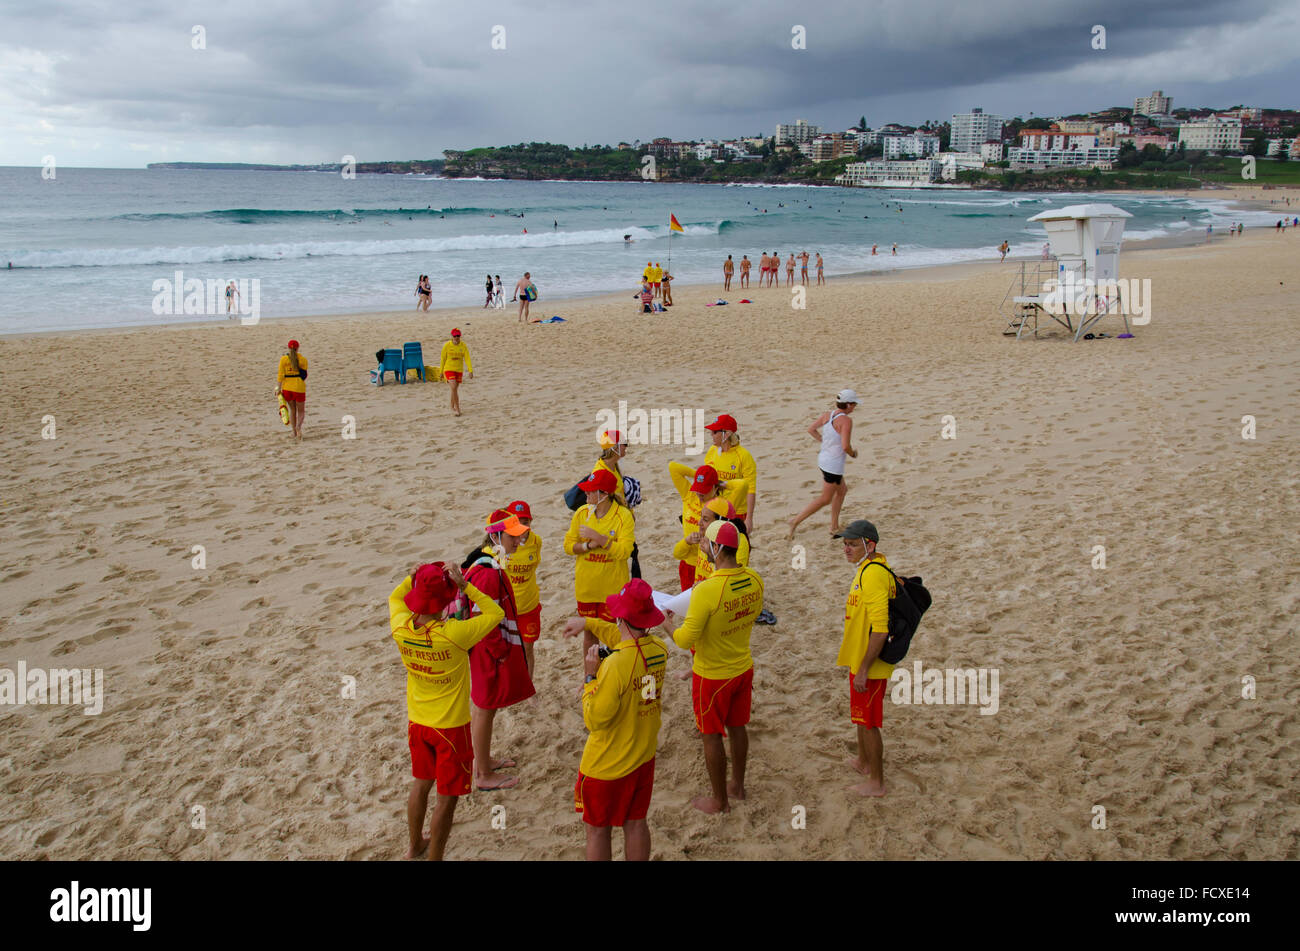 Bondi Beach, Sydney, Australia. 26th Jan, 2016: Australia Day and volunteer Surf Lifesavers sign on for duty at the northern end of Australia's most famous beach. Despite the overcast and stormy weather these Lifesavers can expect to be kept very busy managing and keeping safe the large crowds that will come to the beach on this national holiday. Credit:  Sydney Photographer/Alamy Live News Stock Photo